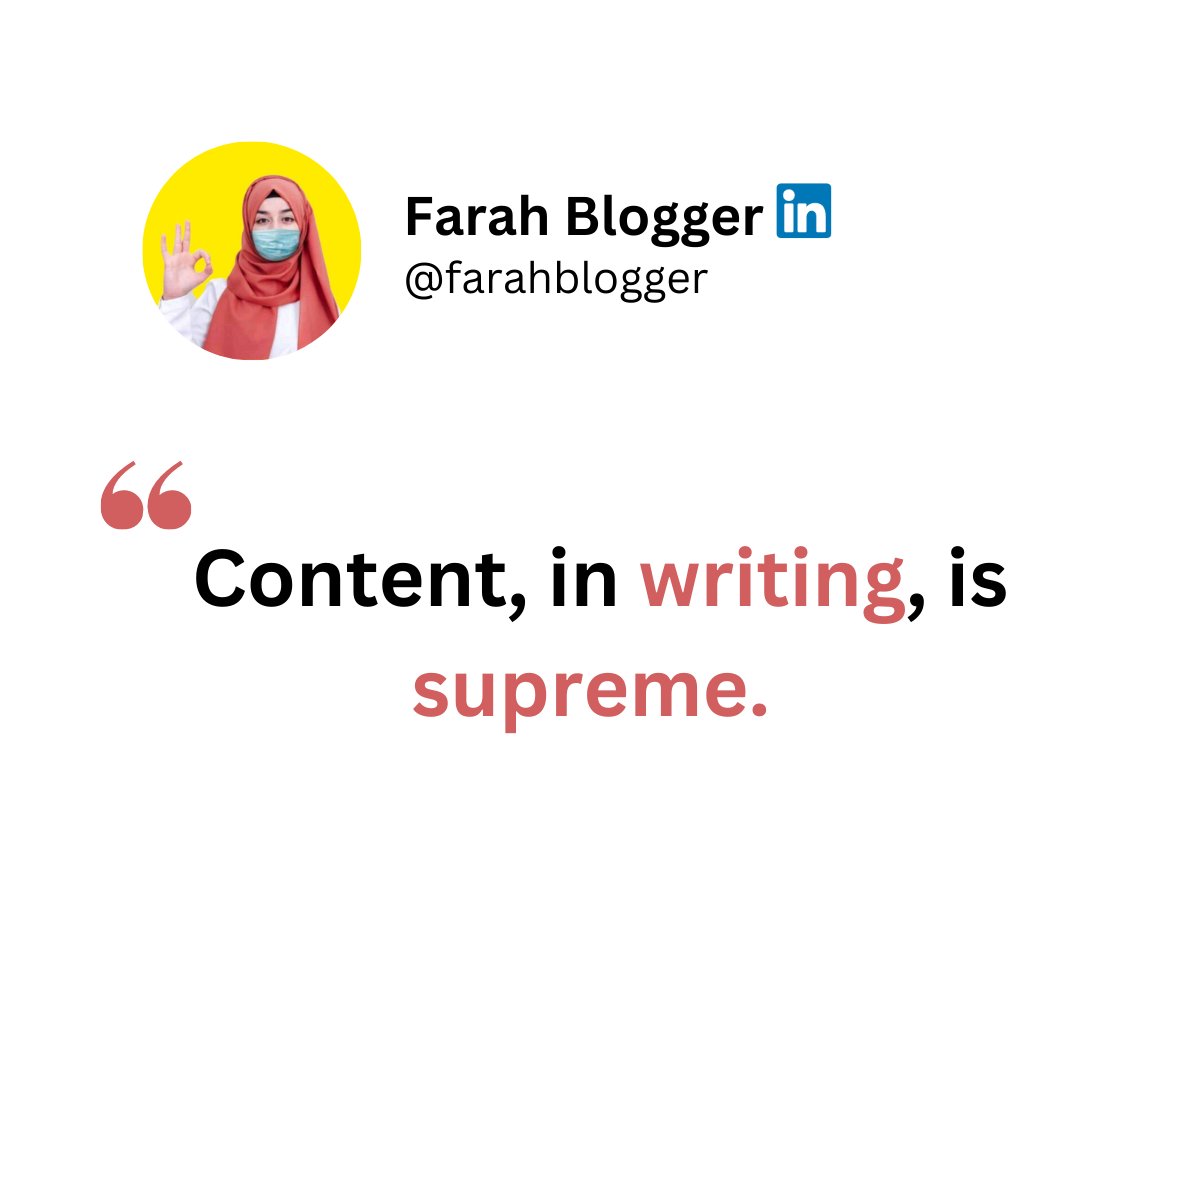 “#Content, in writing, is supreme.” 

#Linkedinprofile #Linkedinprofiles
#contentwriter #ContentWriters #contentwriting #contentwriting #ContentWritingServices #ContentWritingJobs #contentwritingperonalisation